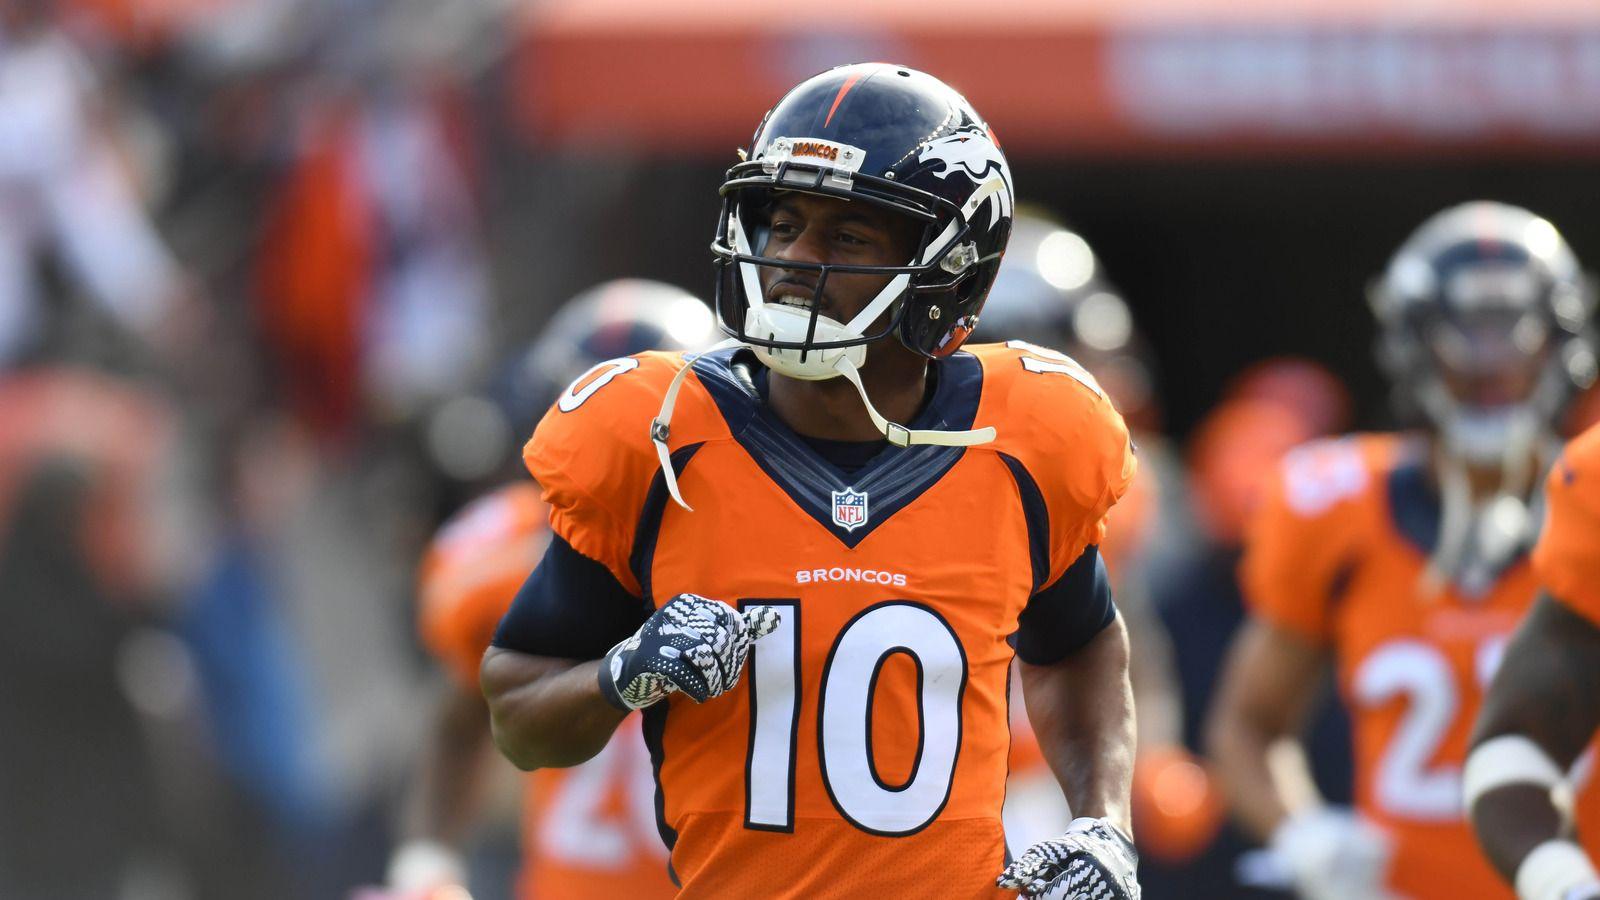 Emmanuel Sanders involved in car accident on way to team facility